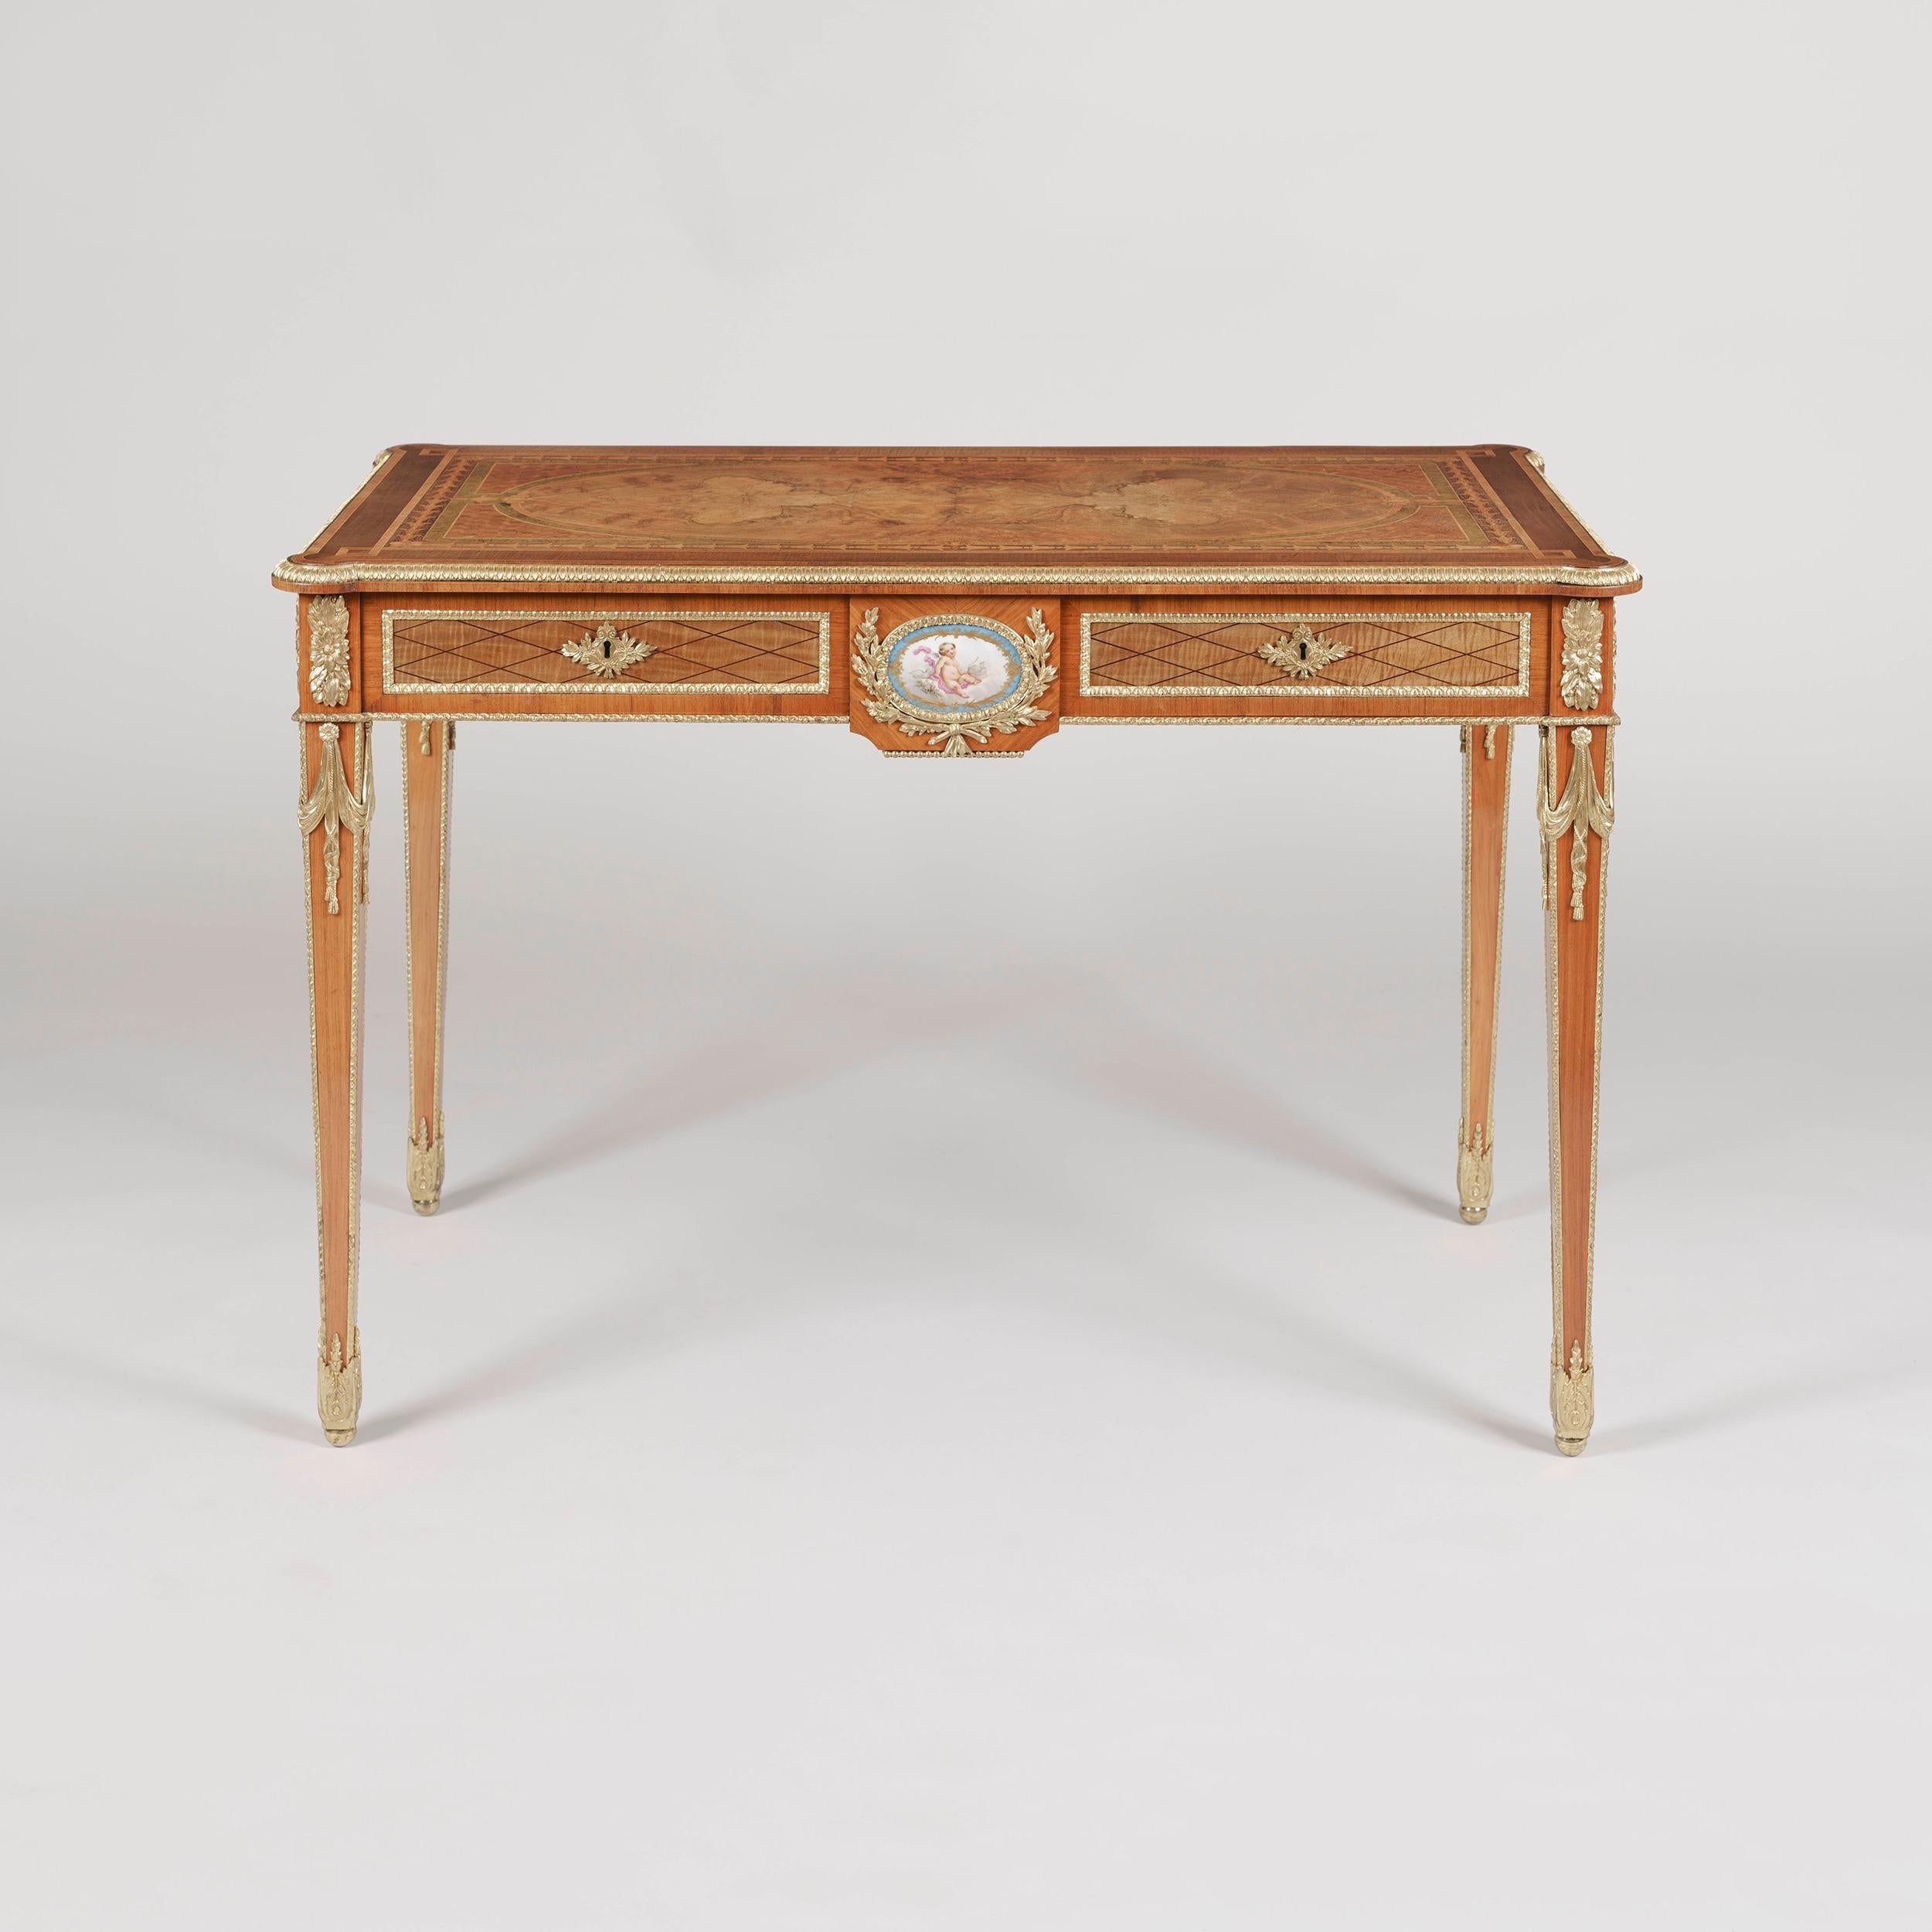 A fine centre table firmly attributed to Holland and Sons

Of free standing rectangular form, constructed in the manner of the Anglicised Louis XVI taste, using Circassian book matched walnut, tulipwoods, green-stained Sycamore and adorned with